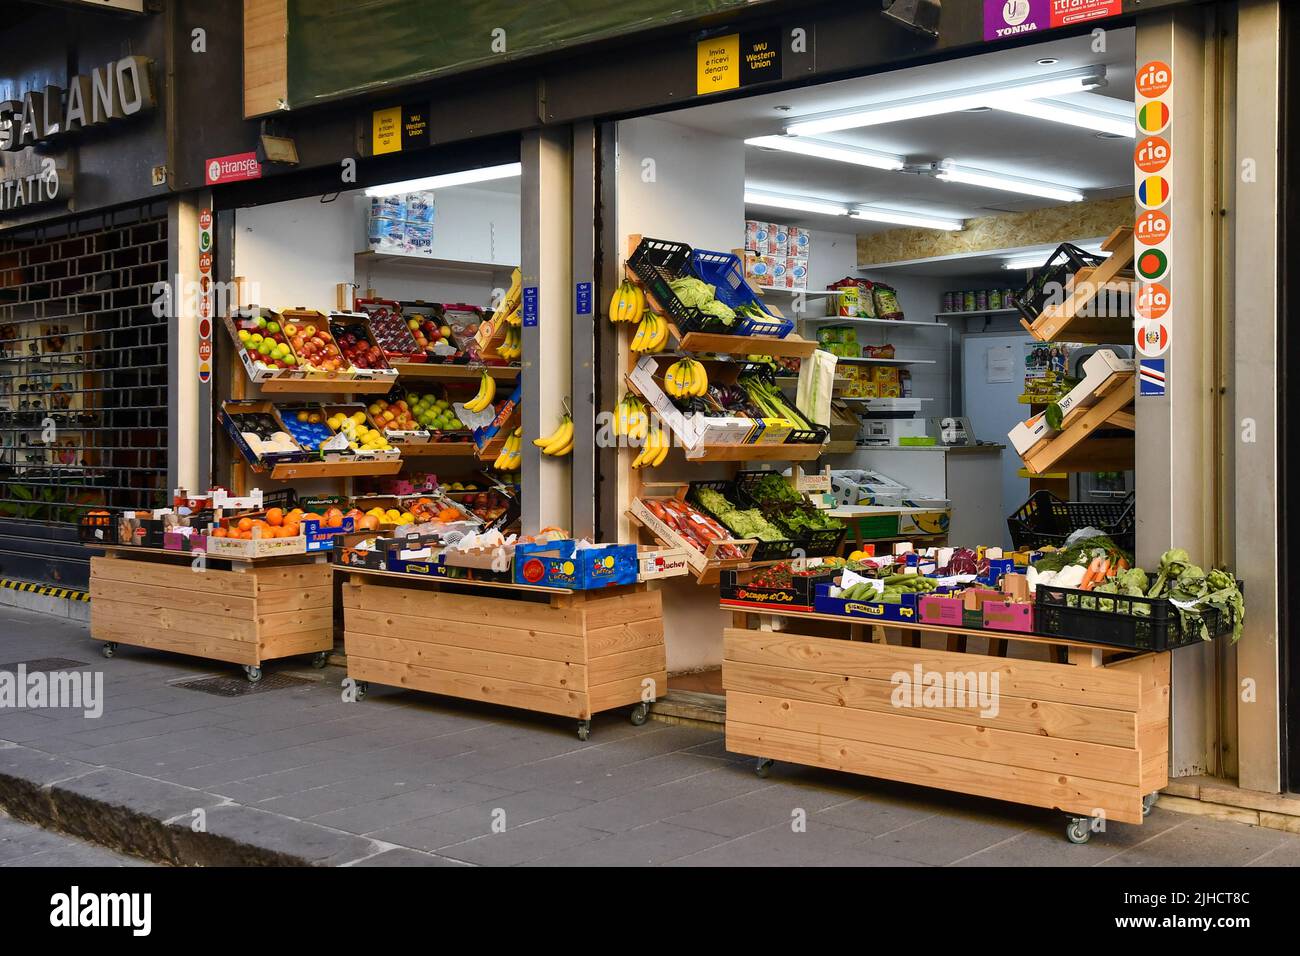 Exterior of a grocery store with fresh fruits and vegetables displayed on the sidewalk, Nervi, Genoa, Liguria, Italy Stock Photo